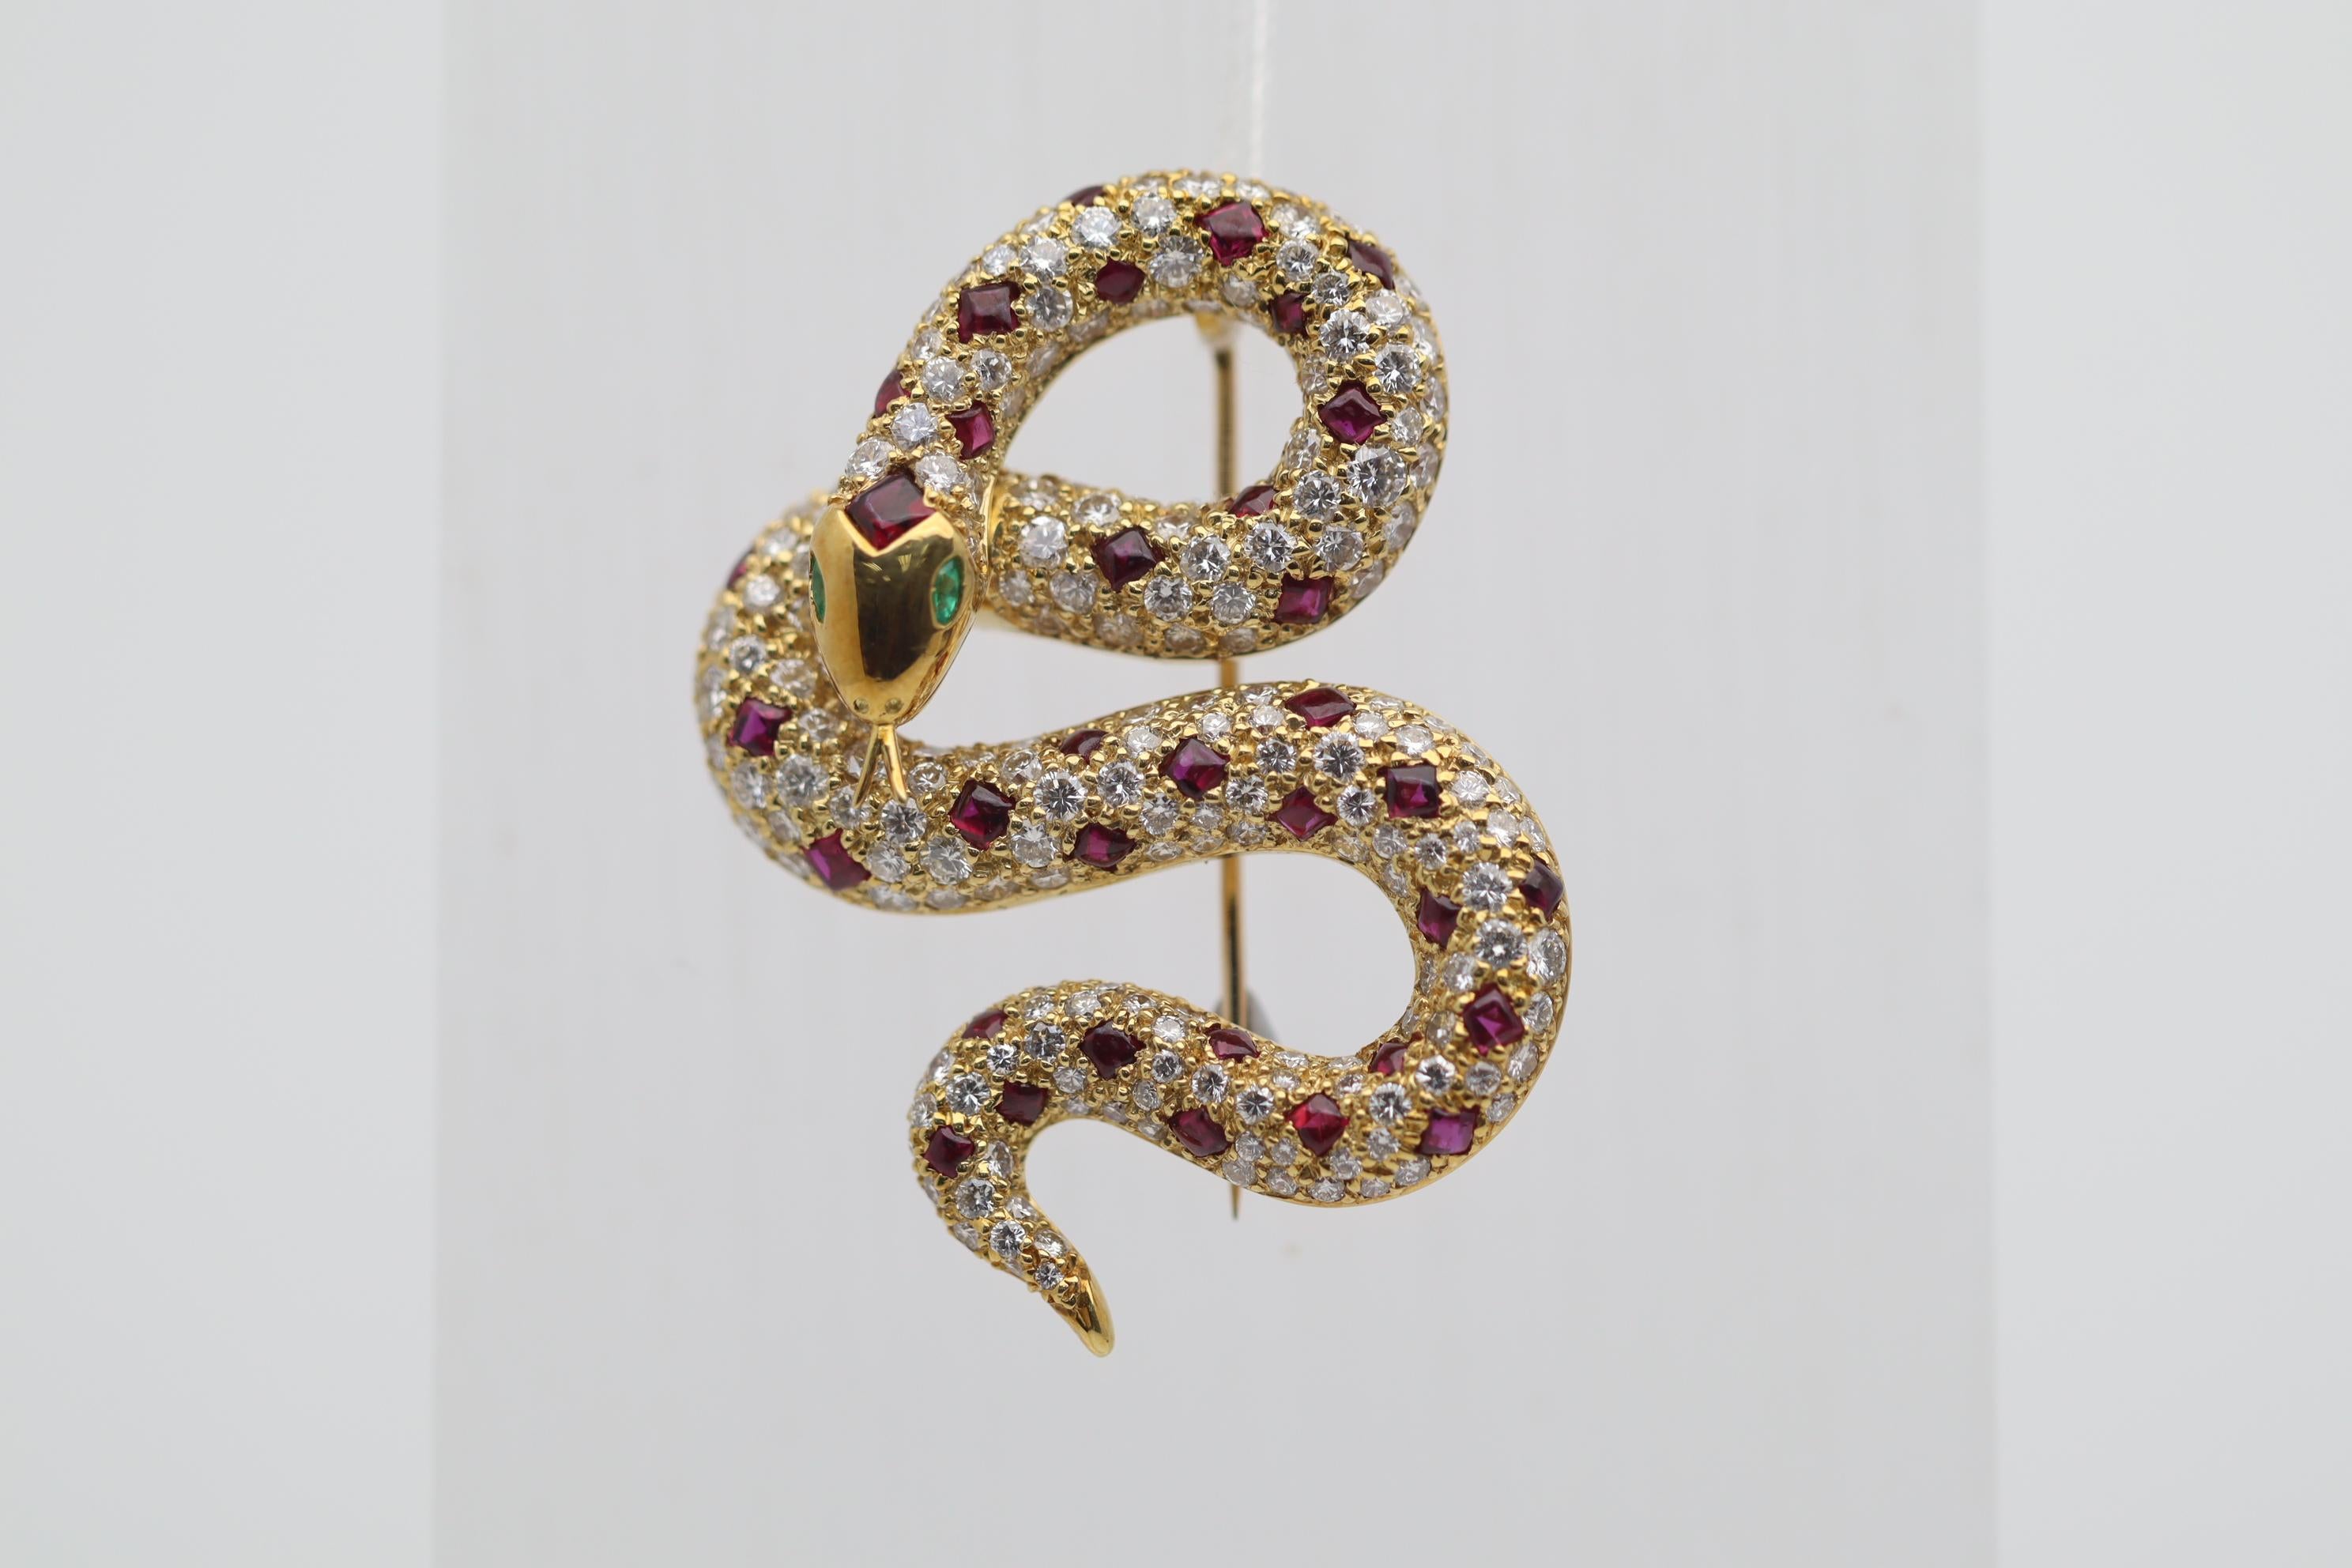 A chic and elegant brooch depicting a coiled gem-studded snake! It features 3.22 carats of round brilliant-cut diamonds which are bright white and clean. Adding to that are 2.64 carats of square shaped cabochon rubies creating a pattern on the